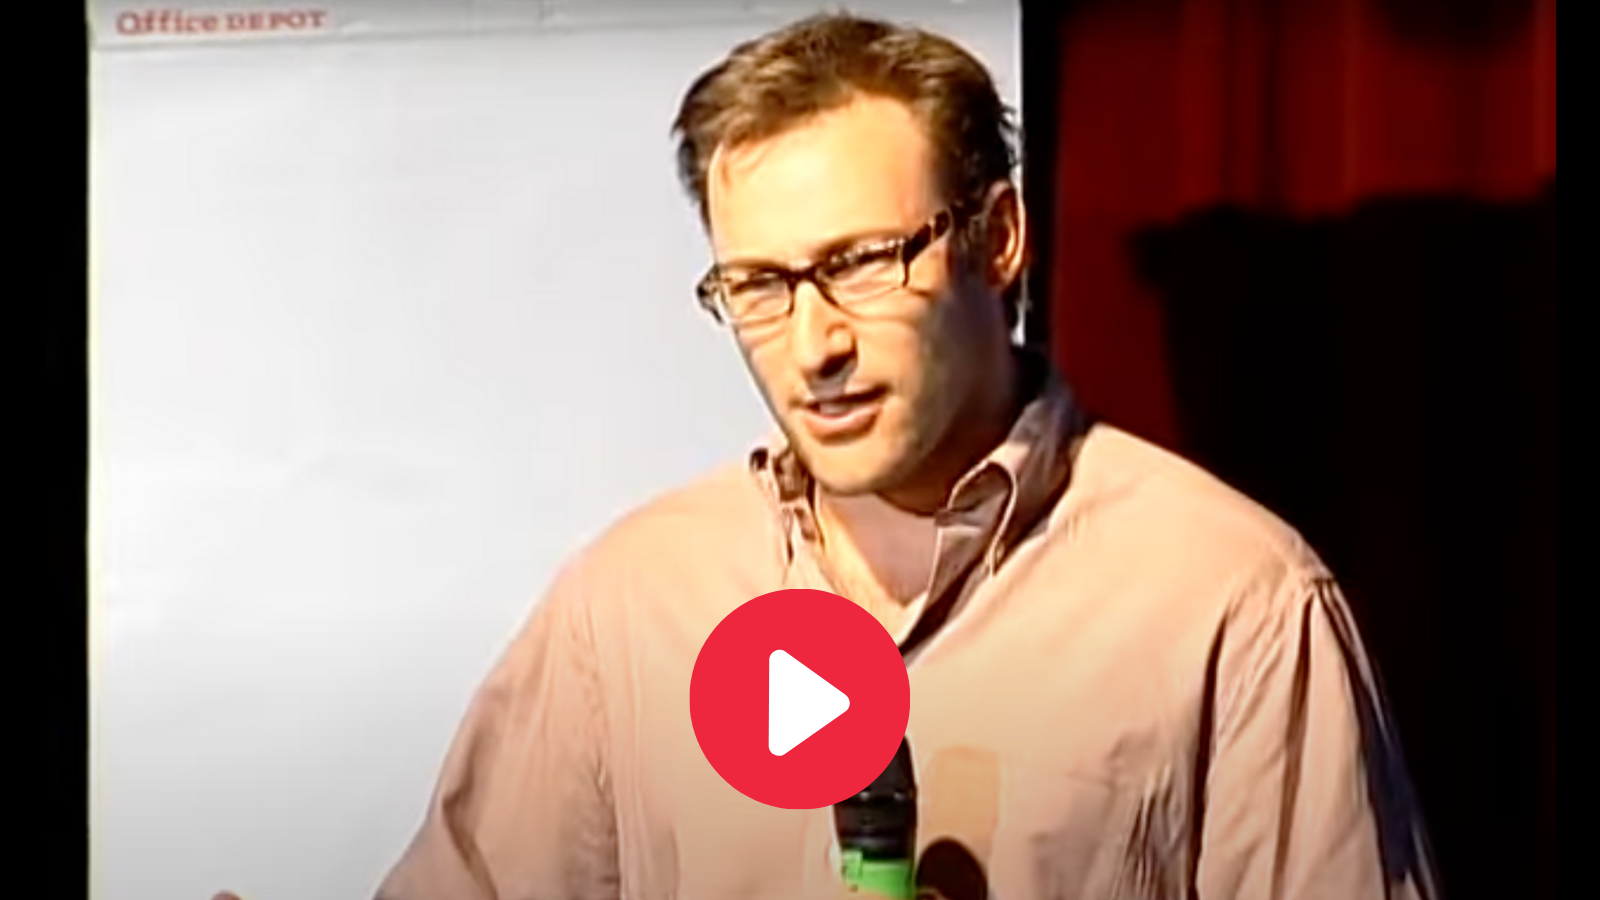 Simon Sinek talking about 'Start with Why' at Ted Talk conference